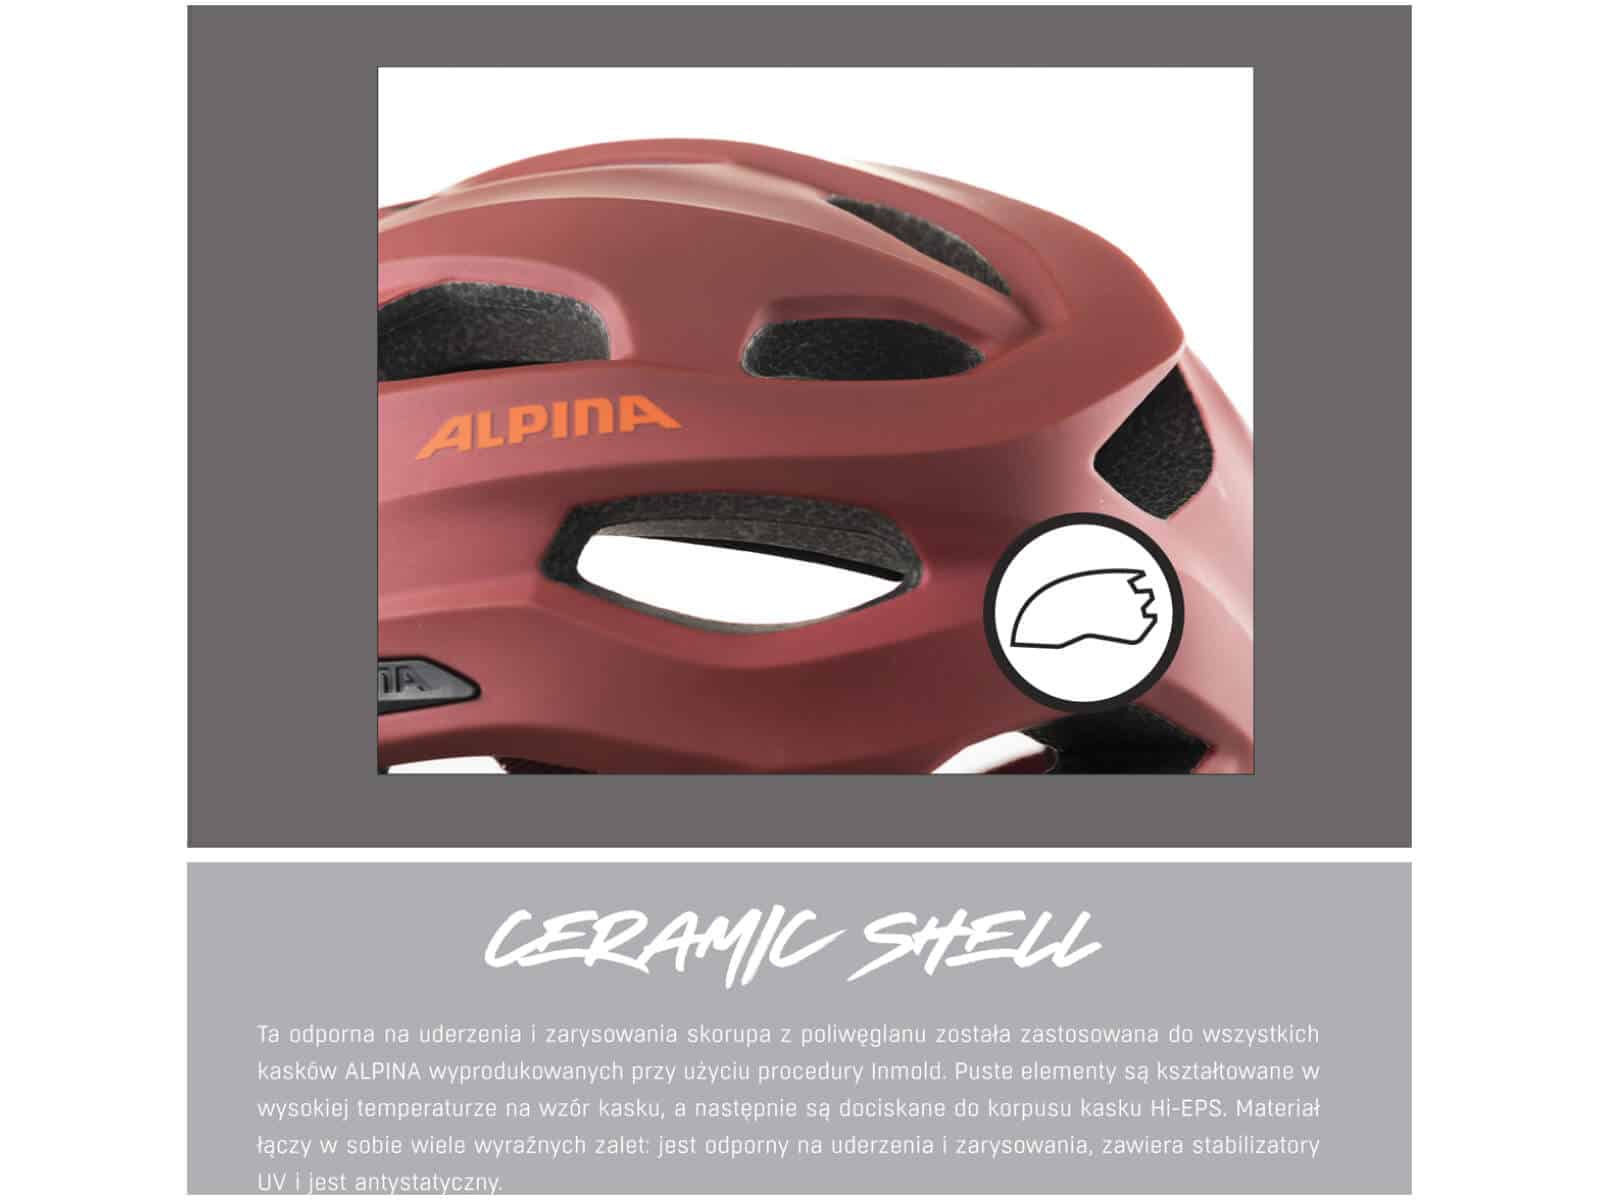 Kask rowerowy Alpina ROOTAGE